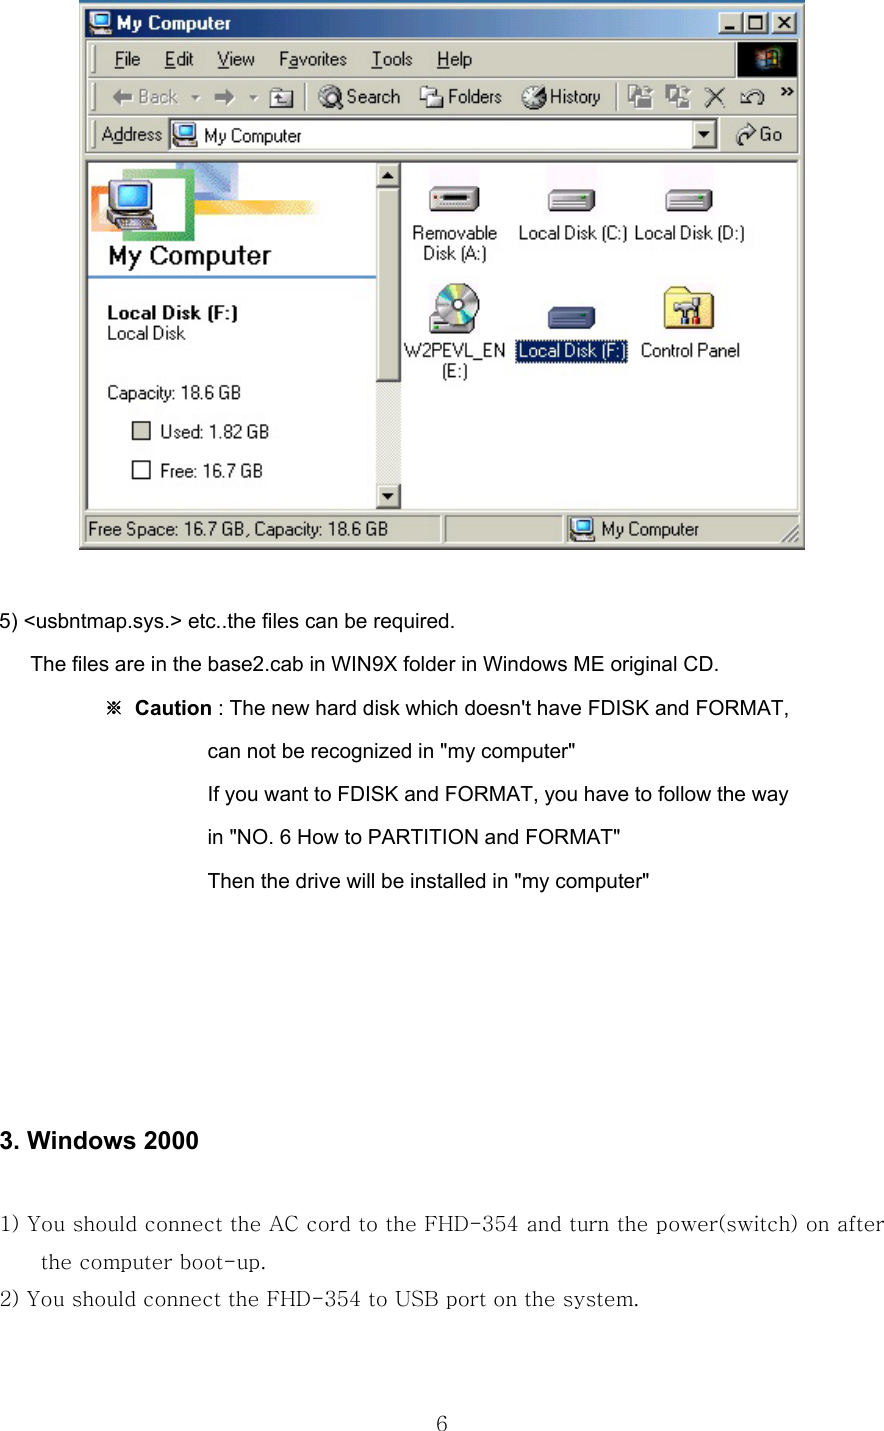  6  5) &lt;usbntmap.sys.&gt; etc..the files can be required.       The files are in the base2.cab in WIN9X folder in Windows ME original CD.     ※ Caution : The new hard disk which doesn&apos;t have FDISK and FORMAT,                     can not be recognized in &quot;my computer&quot;                     If you want to FDISK and FORMAT, you have to follow the way                     in &quot;NO. 6 How to PARTITION and FORMAT&quot;                       Then the drive will be installed in &quot;my computer&quot;      3. Windows 2000  1) You should connect the AC cord to the FHD-354 and turn the power(switch) on after the computer boot-up. 2) You should connect the FHD-354 to USB port on the system.  